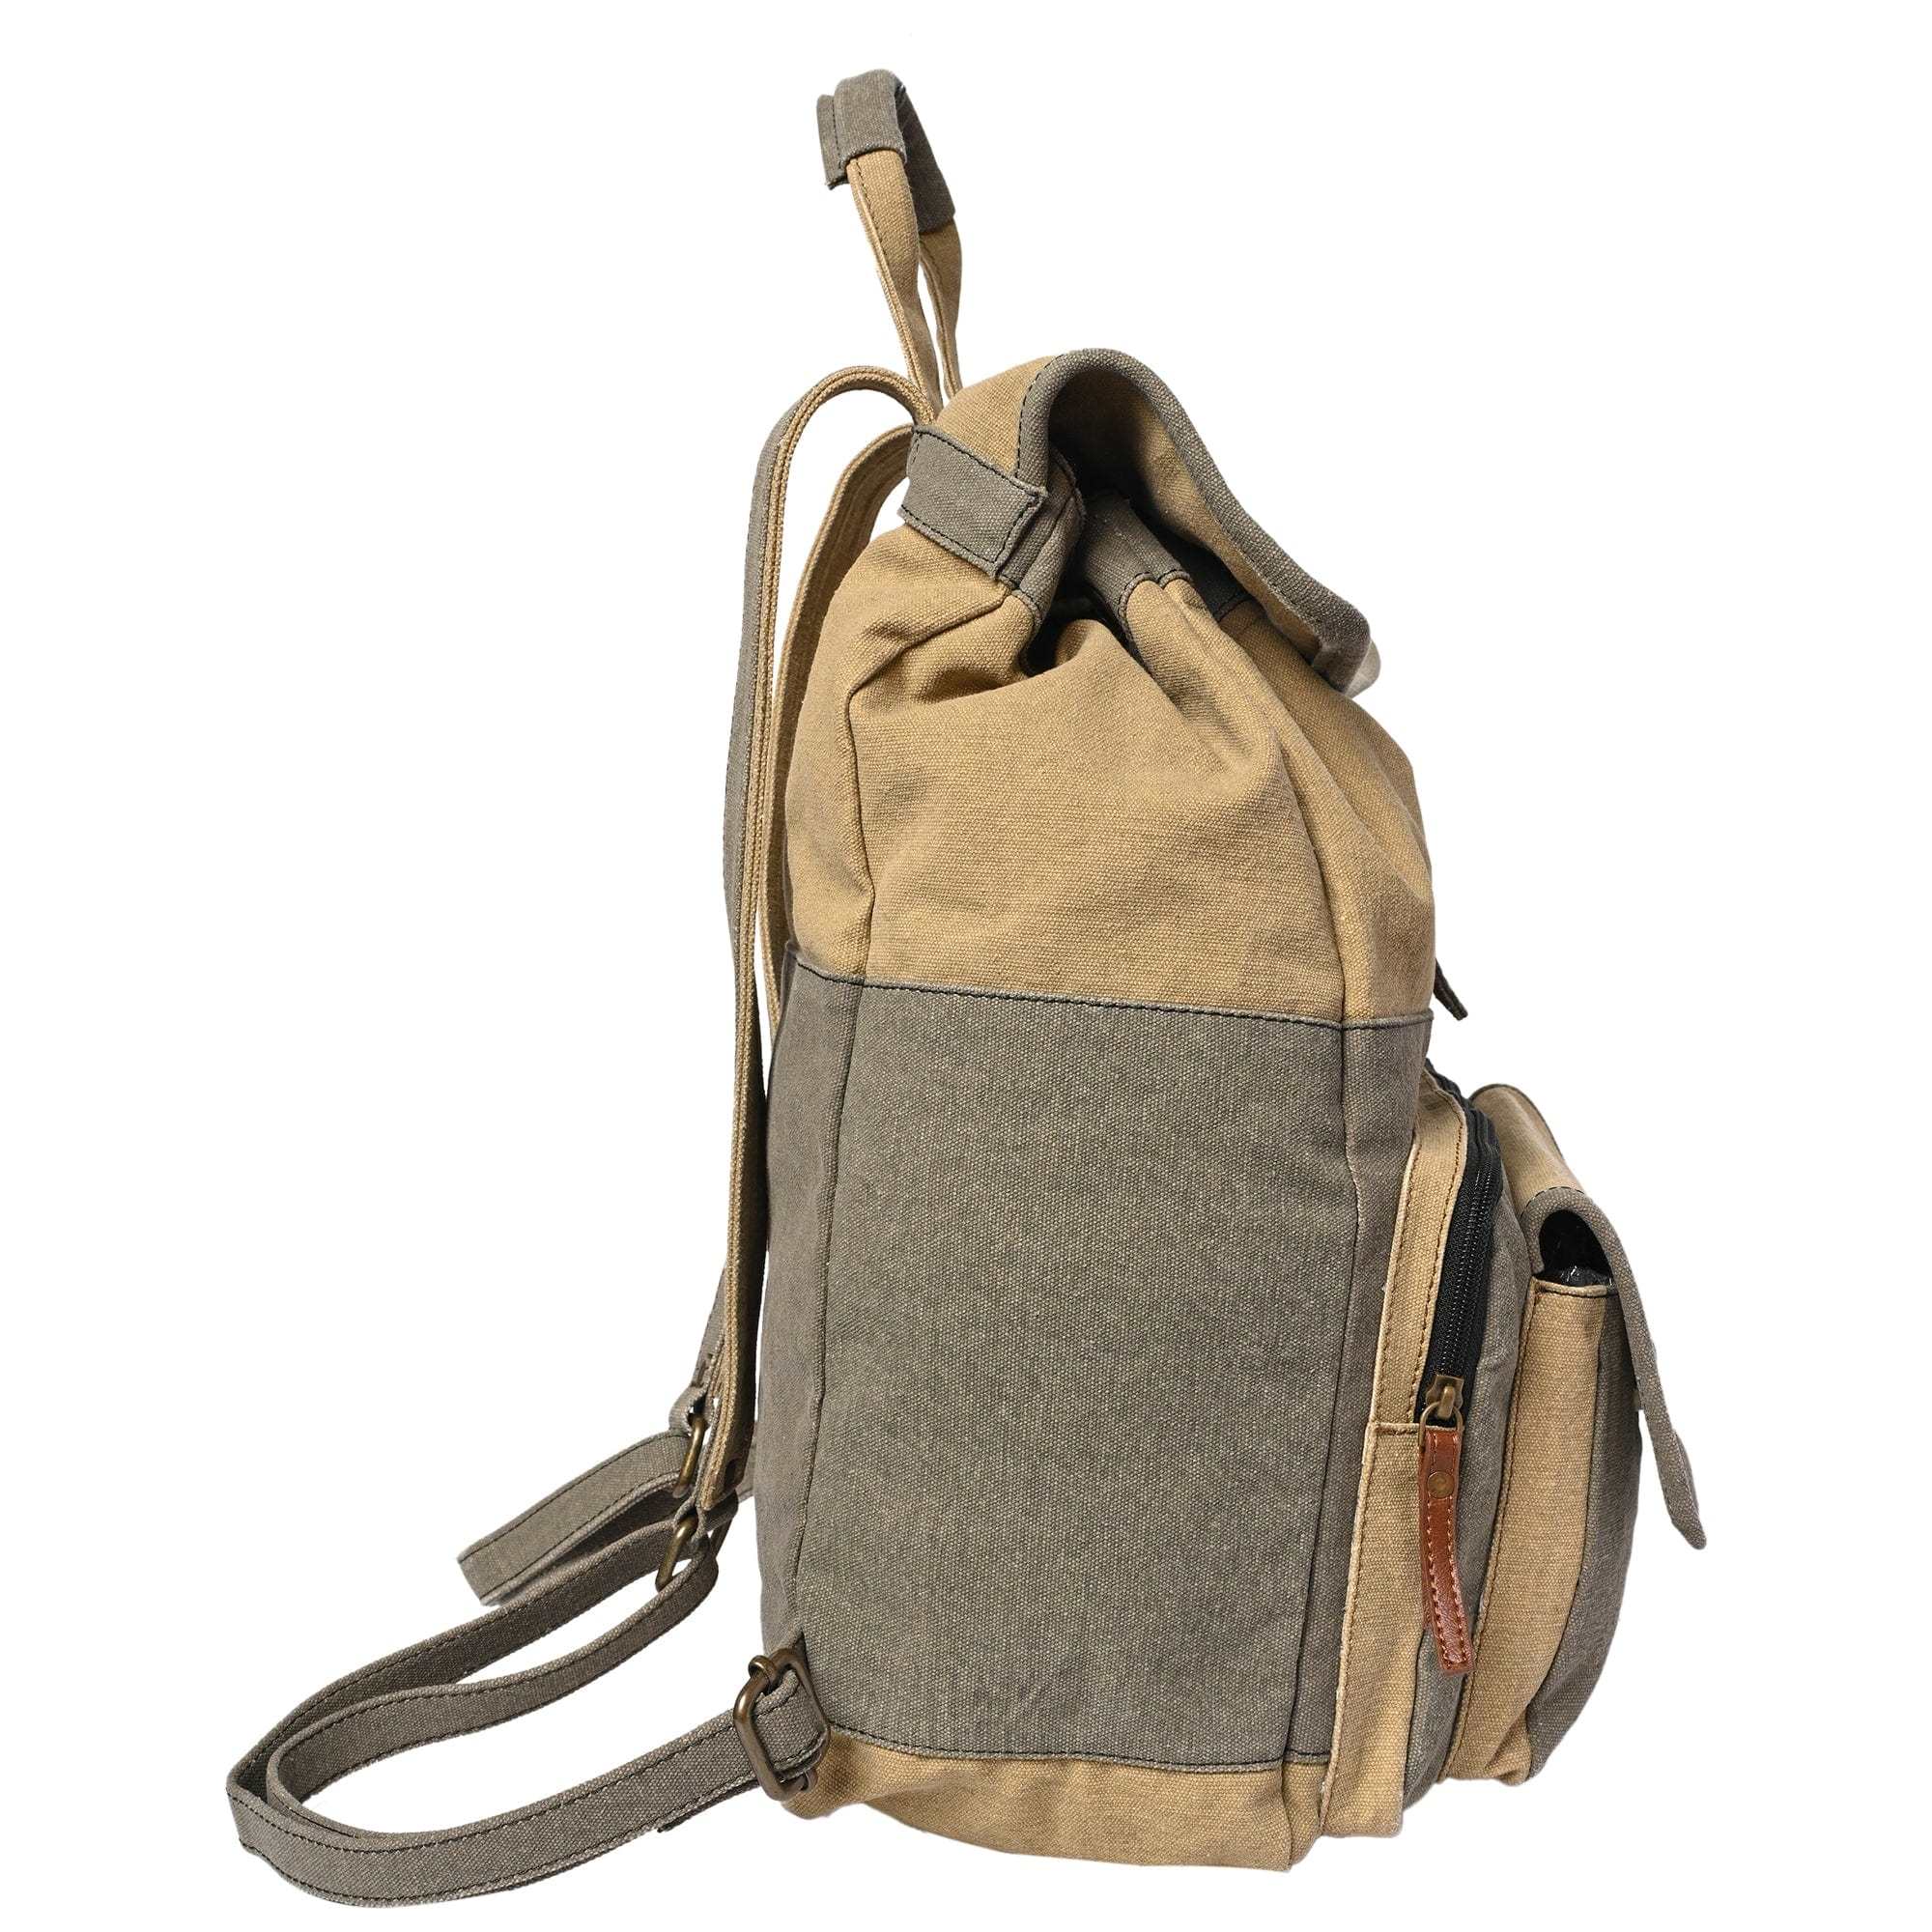 Mona-B Bag Mona B - Stone 100% Cotton Canvas Back Pack for Offices Schools and Colleges with Two Outside Pockets and Stylish Design for Men and Women